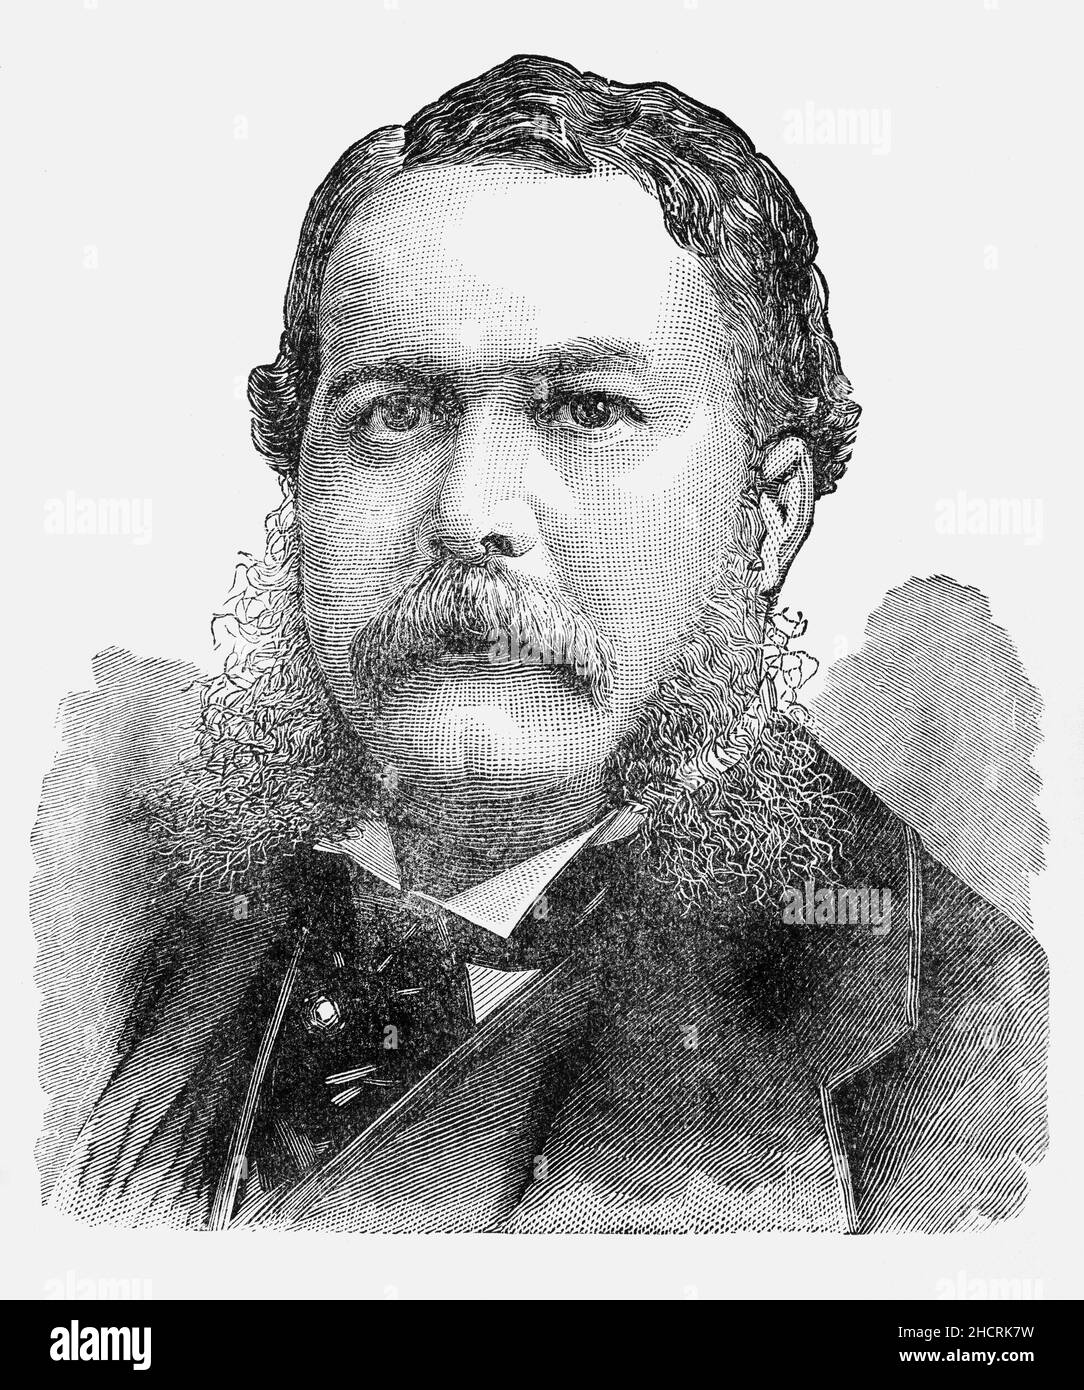 A late 19th Century portrait of Chester Alan Arthur (1829-1886) was an American lawyer and politician who served as the 21st president of the United States from 1881 to 1885. Previously the 20th vice president, he succeeded to the presidency upon the death of President James A. Garfield in September 1881, two months after Garfield was shot by an assassin. Stock Photo